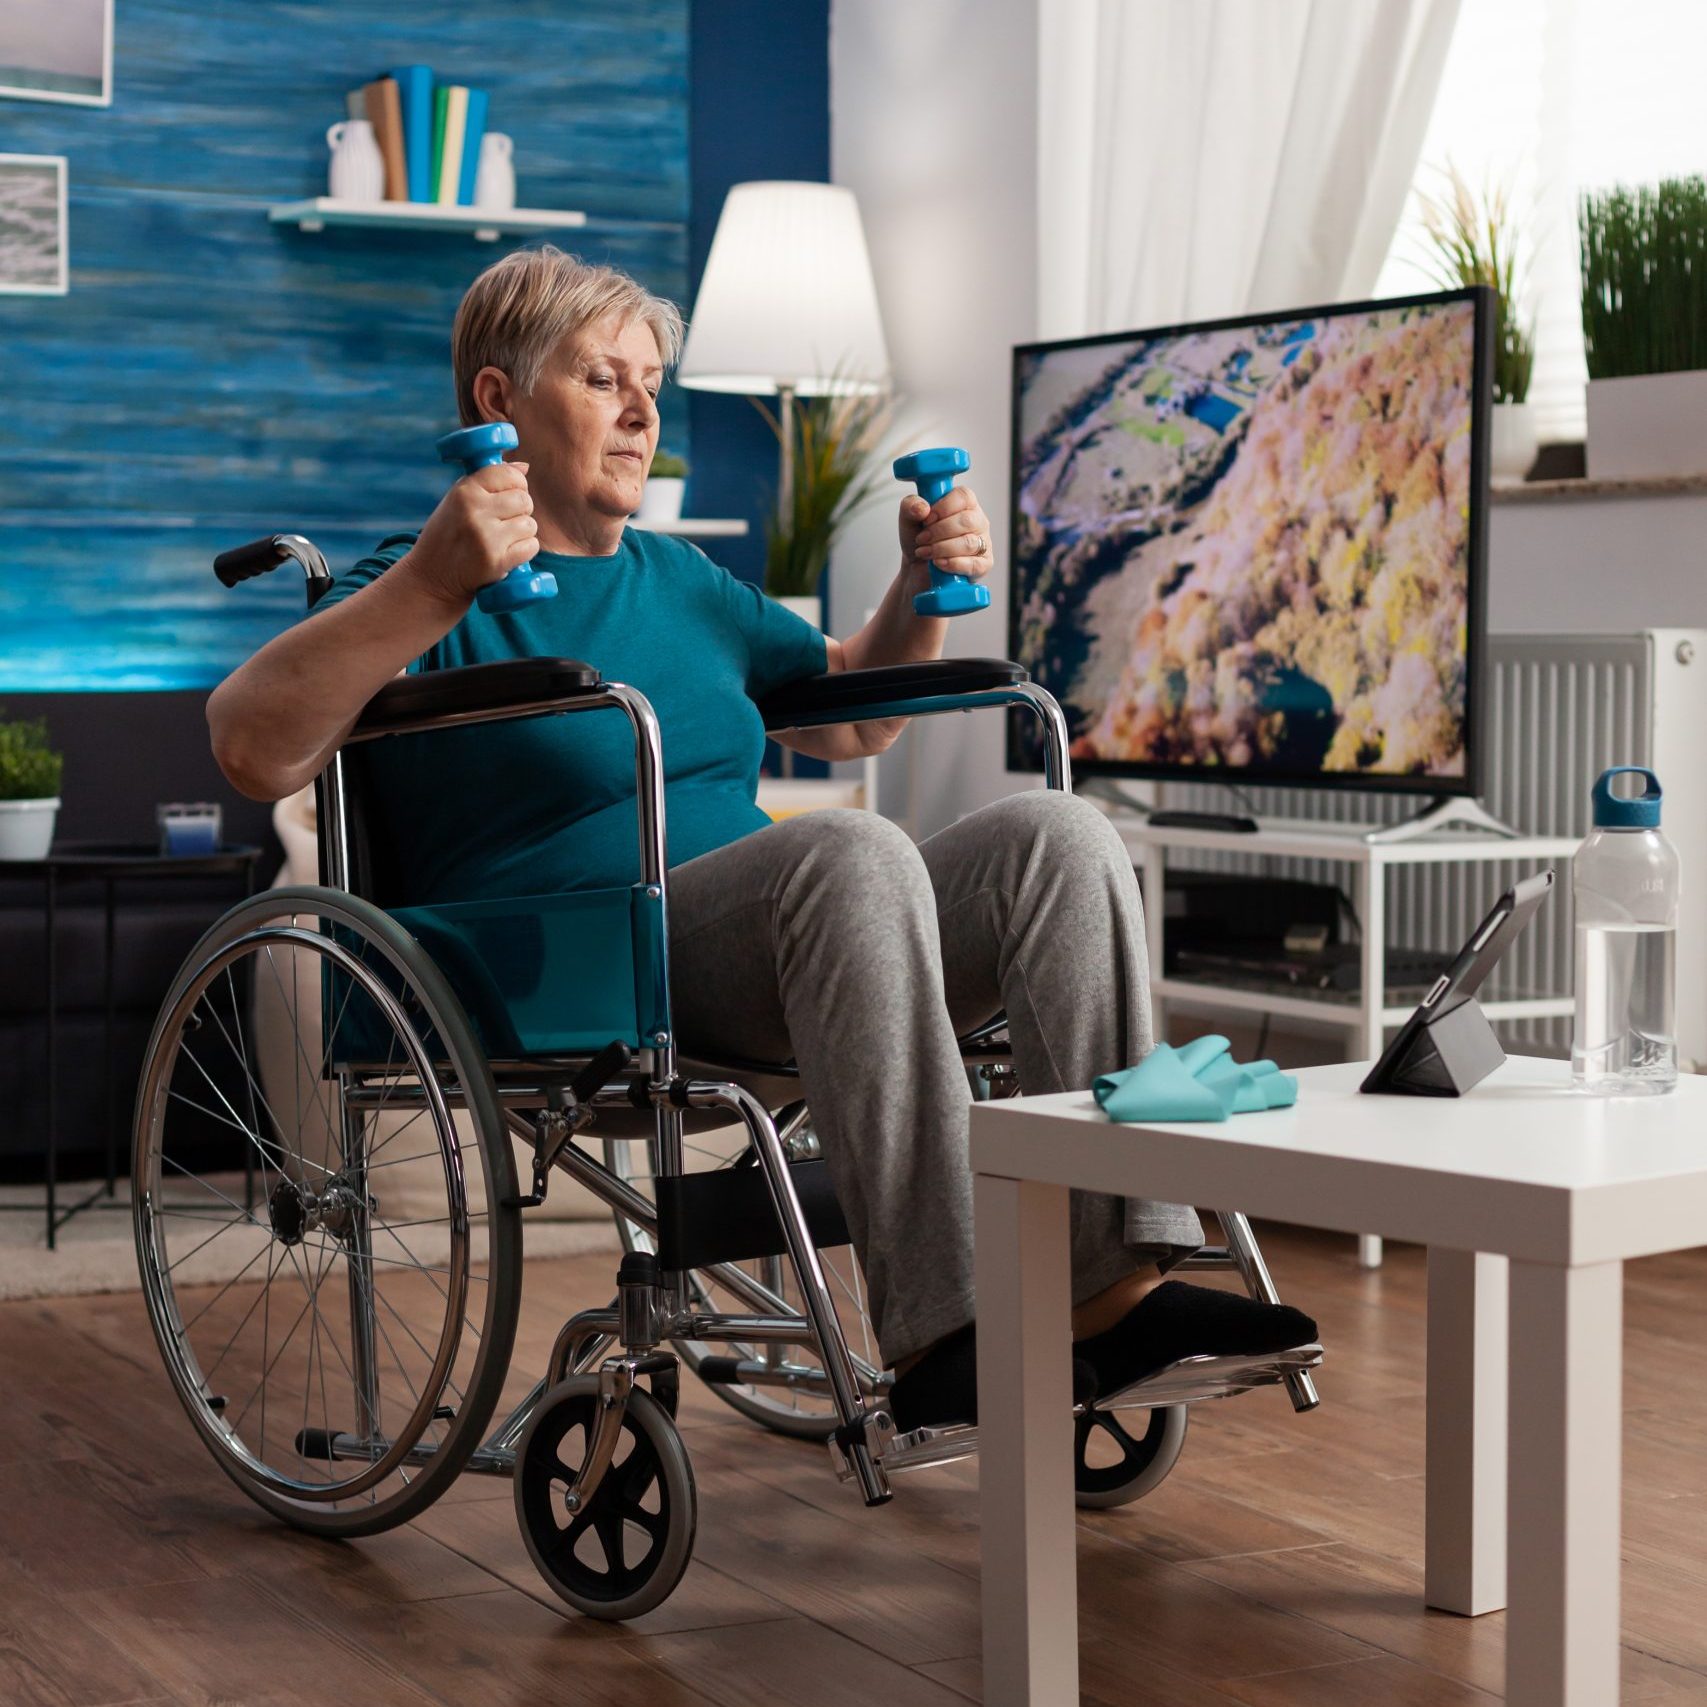 Handicapped senior woman in wheelchair stretching arms muscles exercising body resistance using workout dumbbells in living room. Handicapped pensioner looking at lifestyle aerobics video on tablet